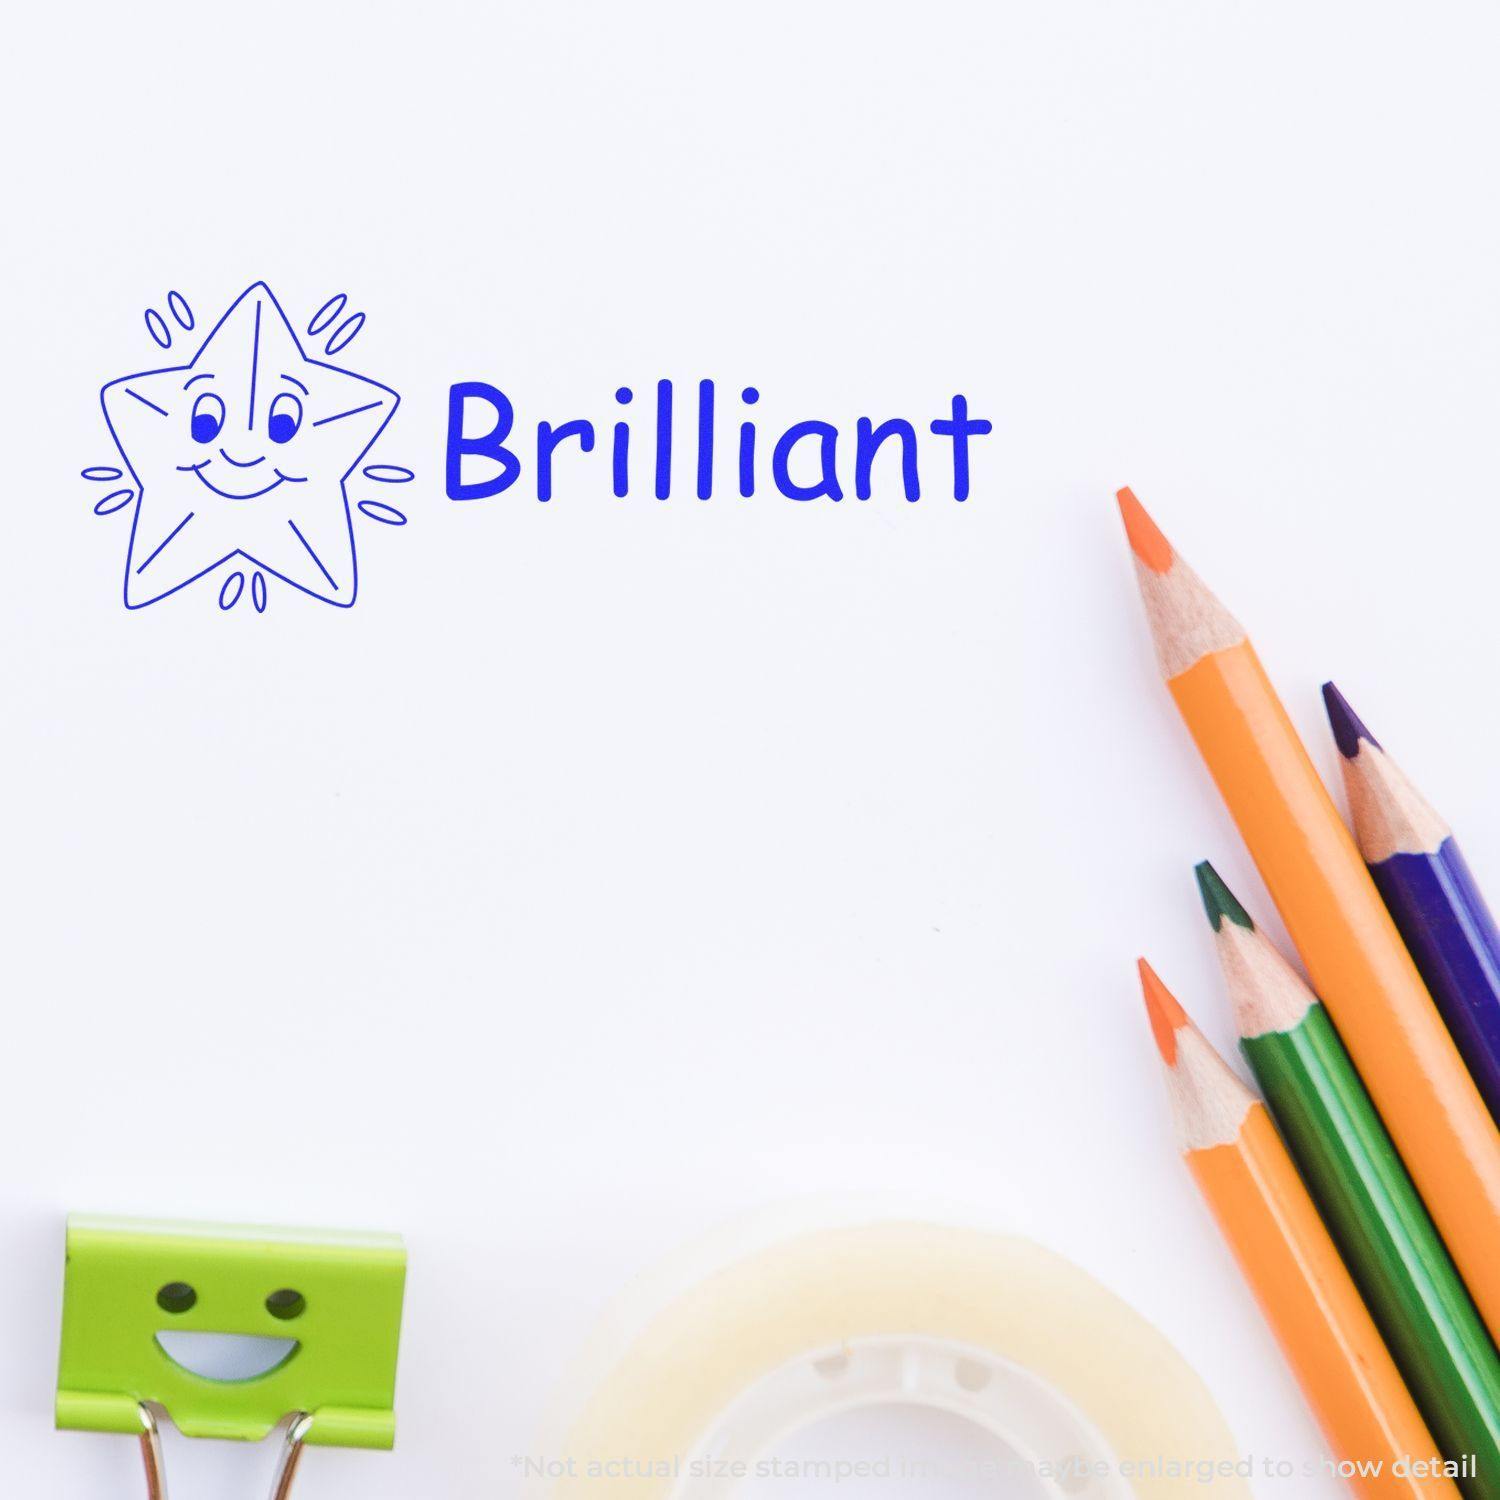 A stock office rubber stamp with a stamped image showing how the text "Brilliant" with a graphic of a smiling shining star is displayed after stamping.